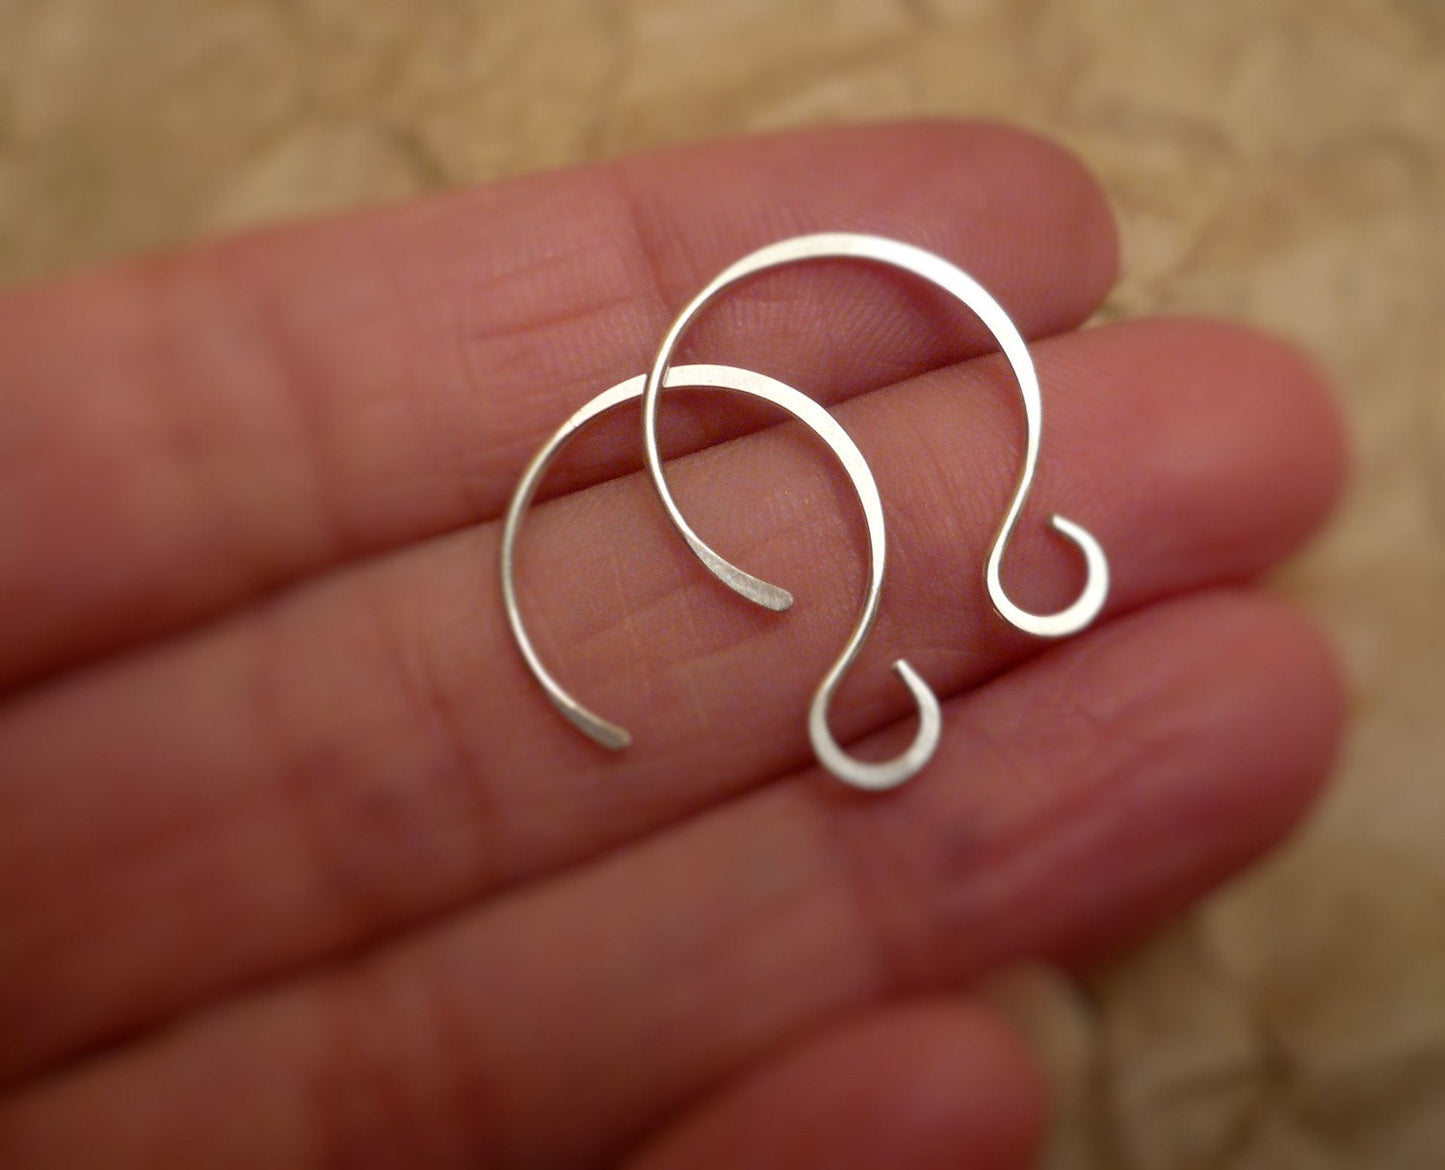 Sample Pack 4 pairs of my Sterling Silver Earwires - Handmade. Handforged. Shiny Finish. Made to Order